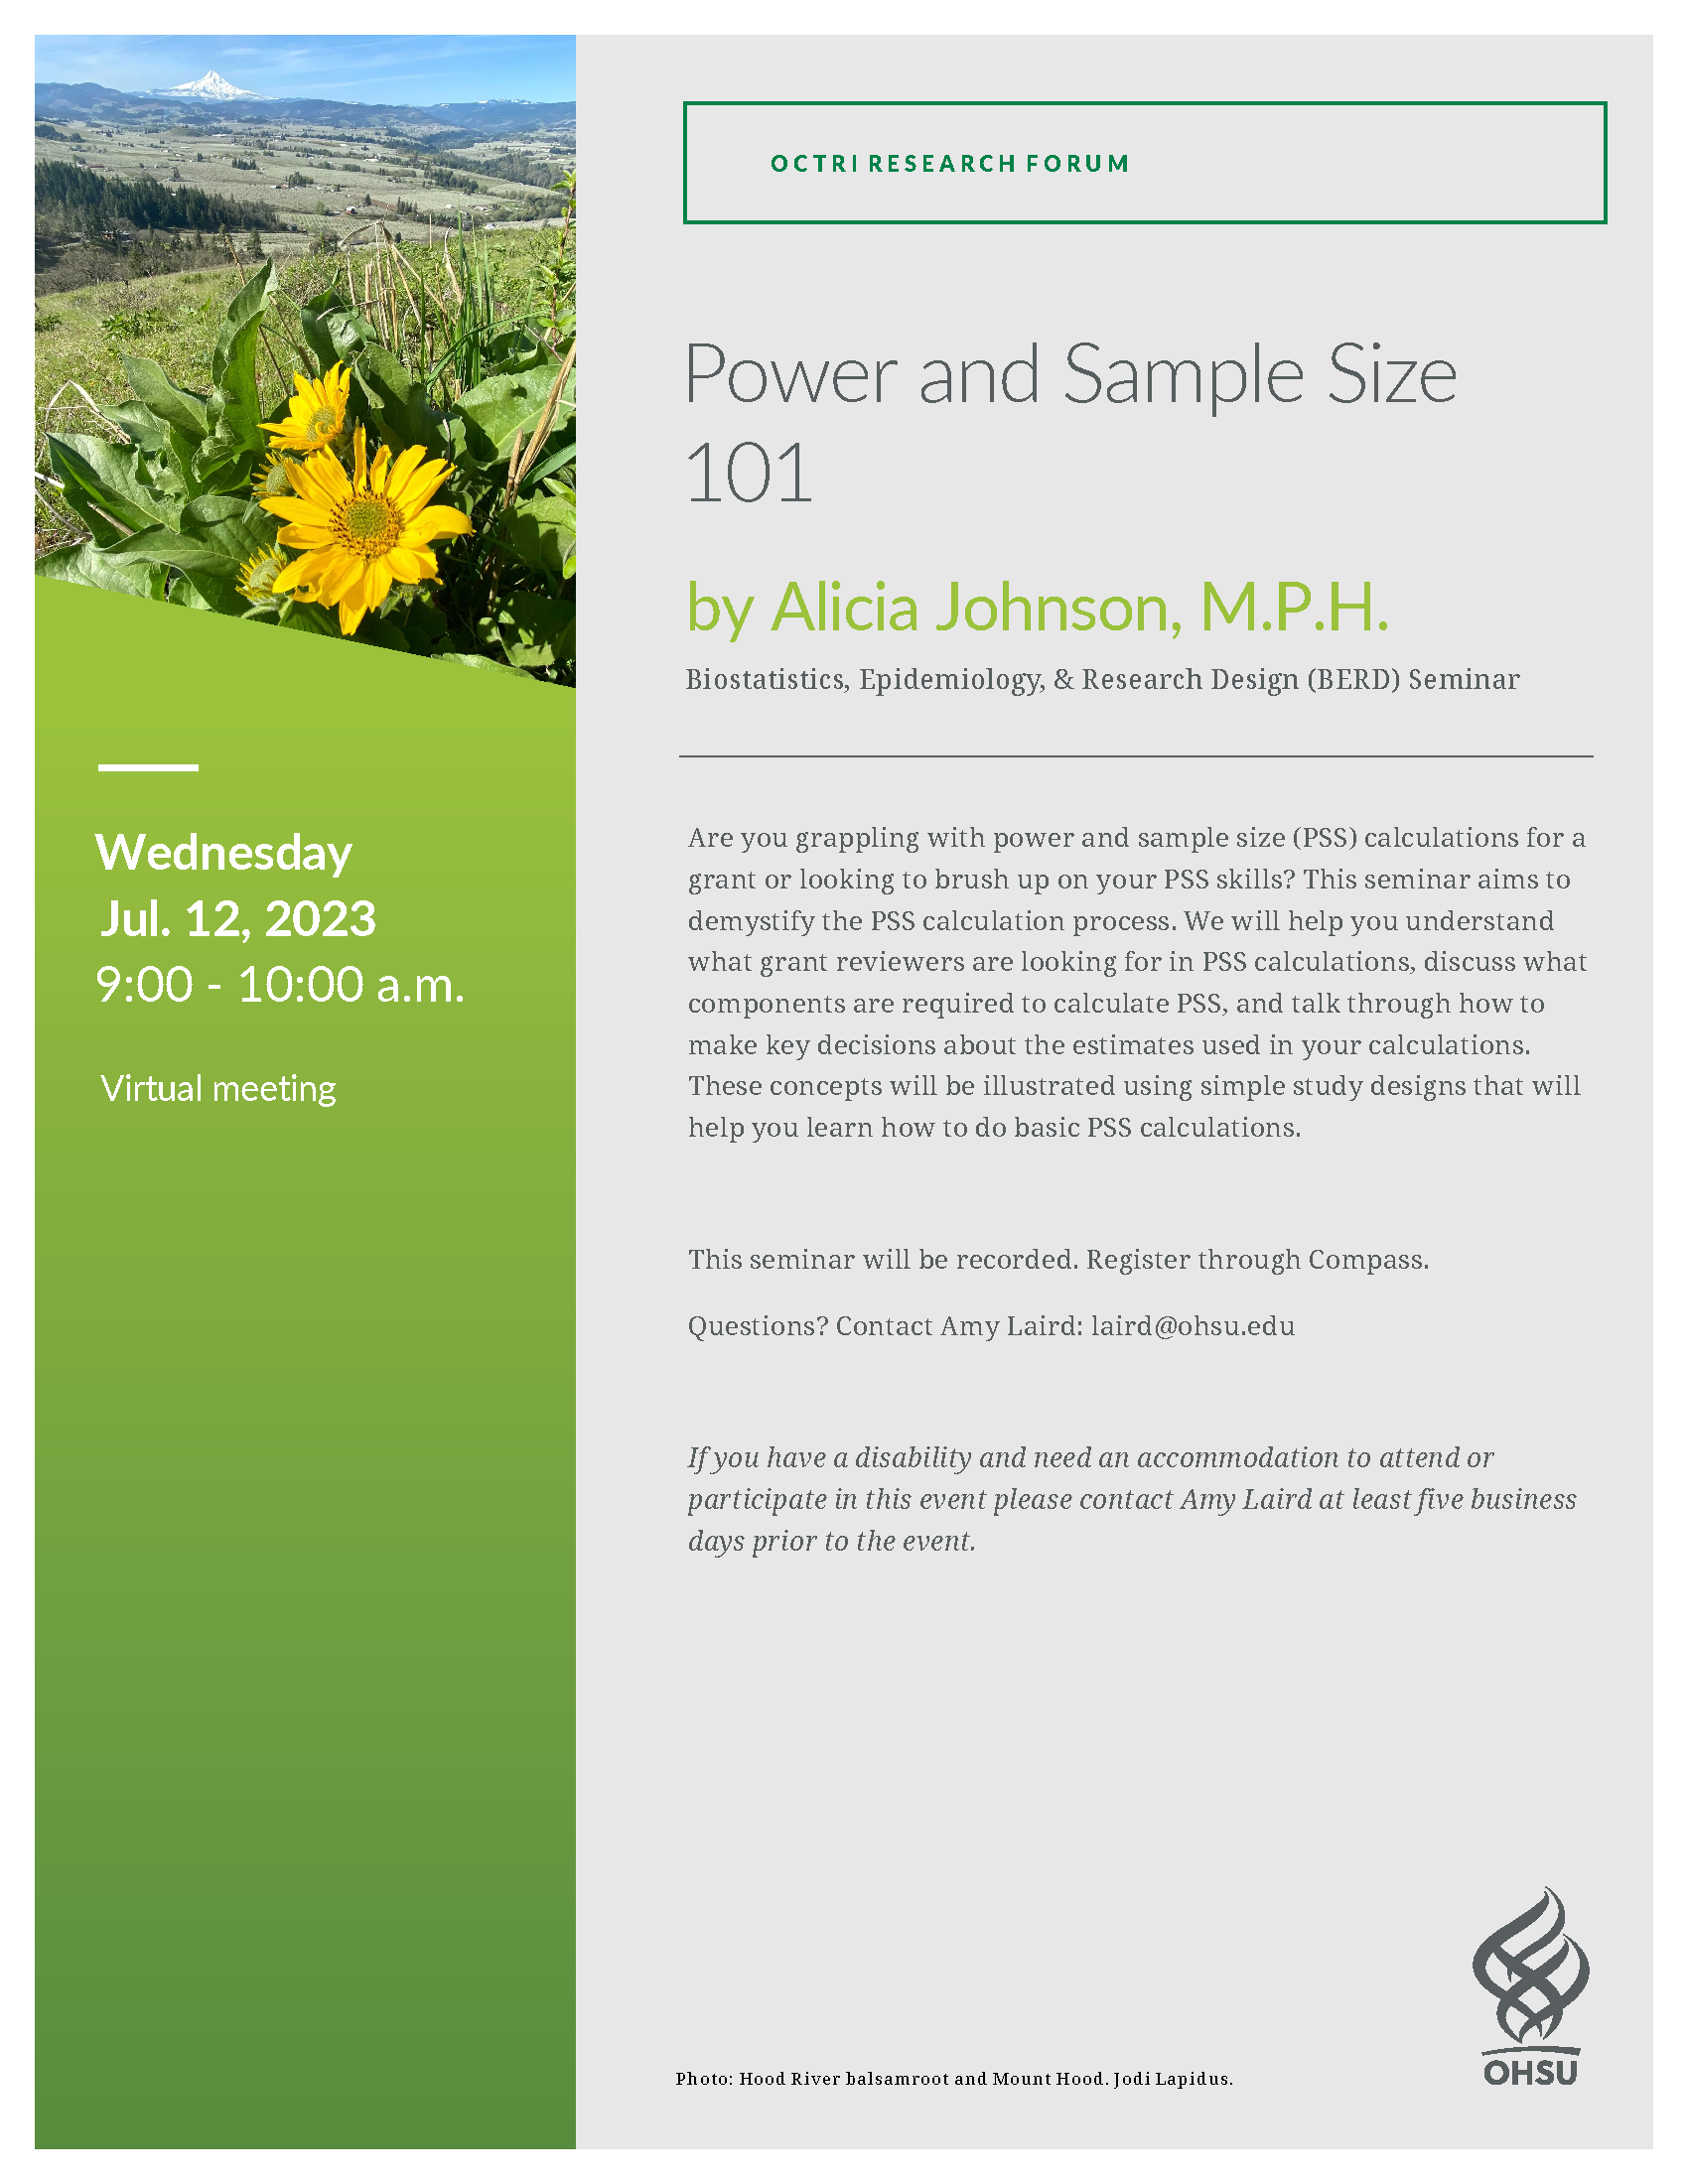 Power and Sample Size 101 Flyer